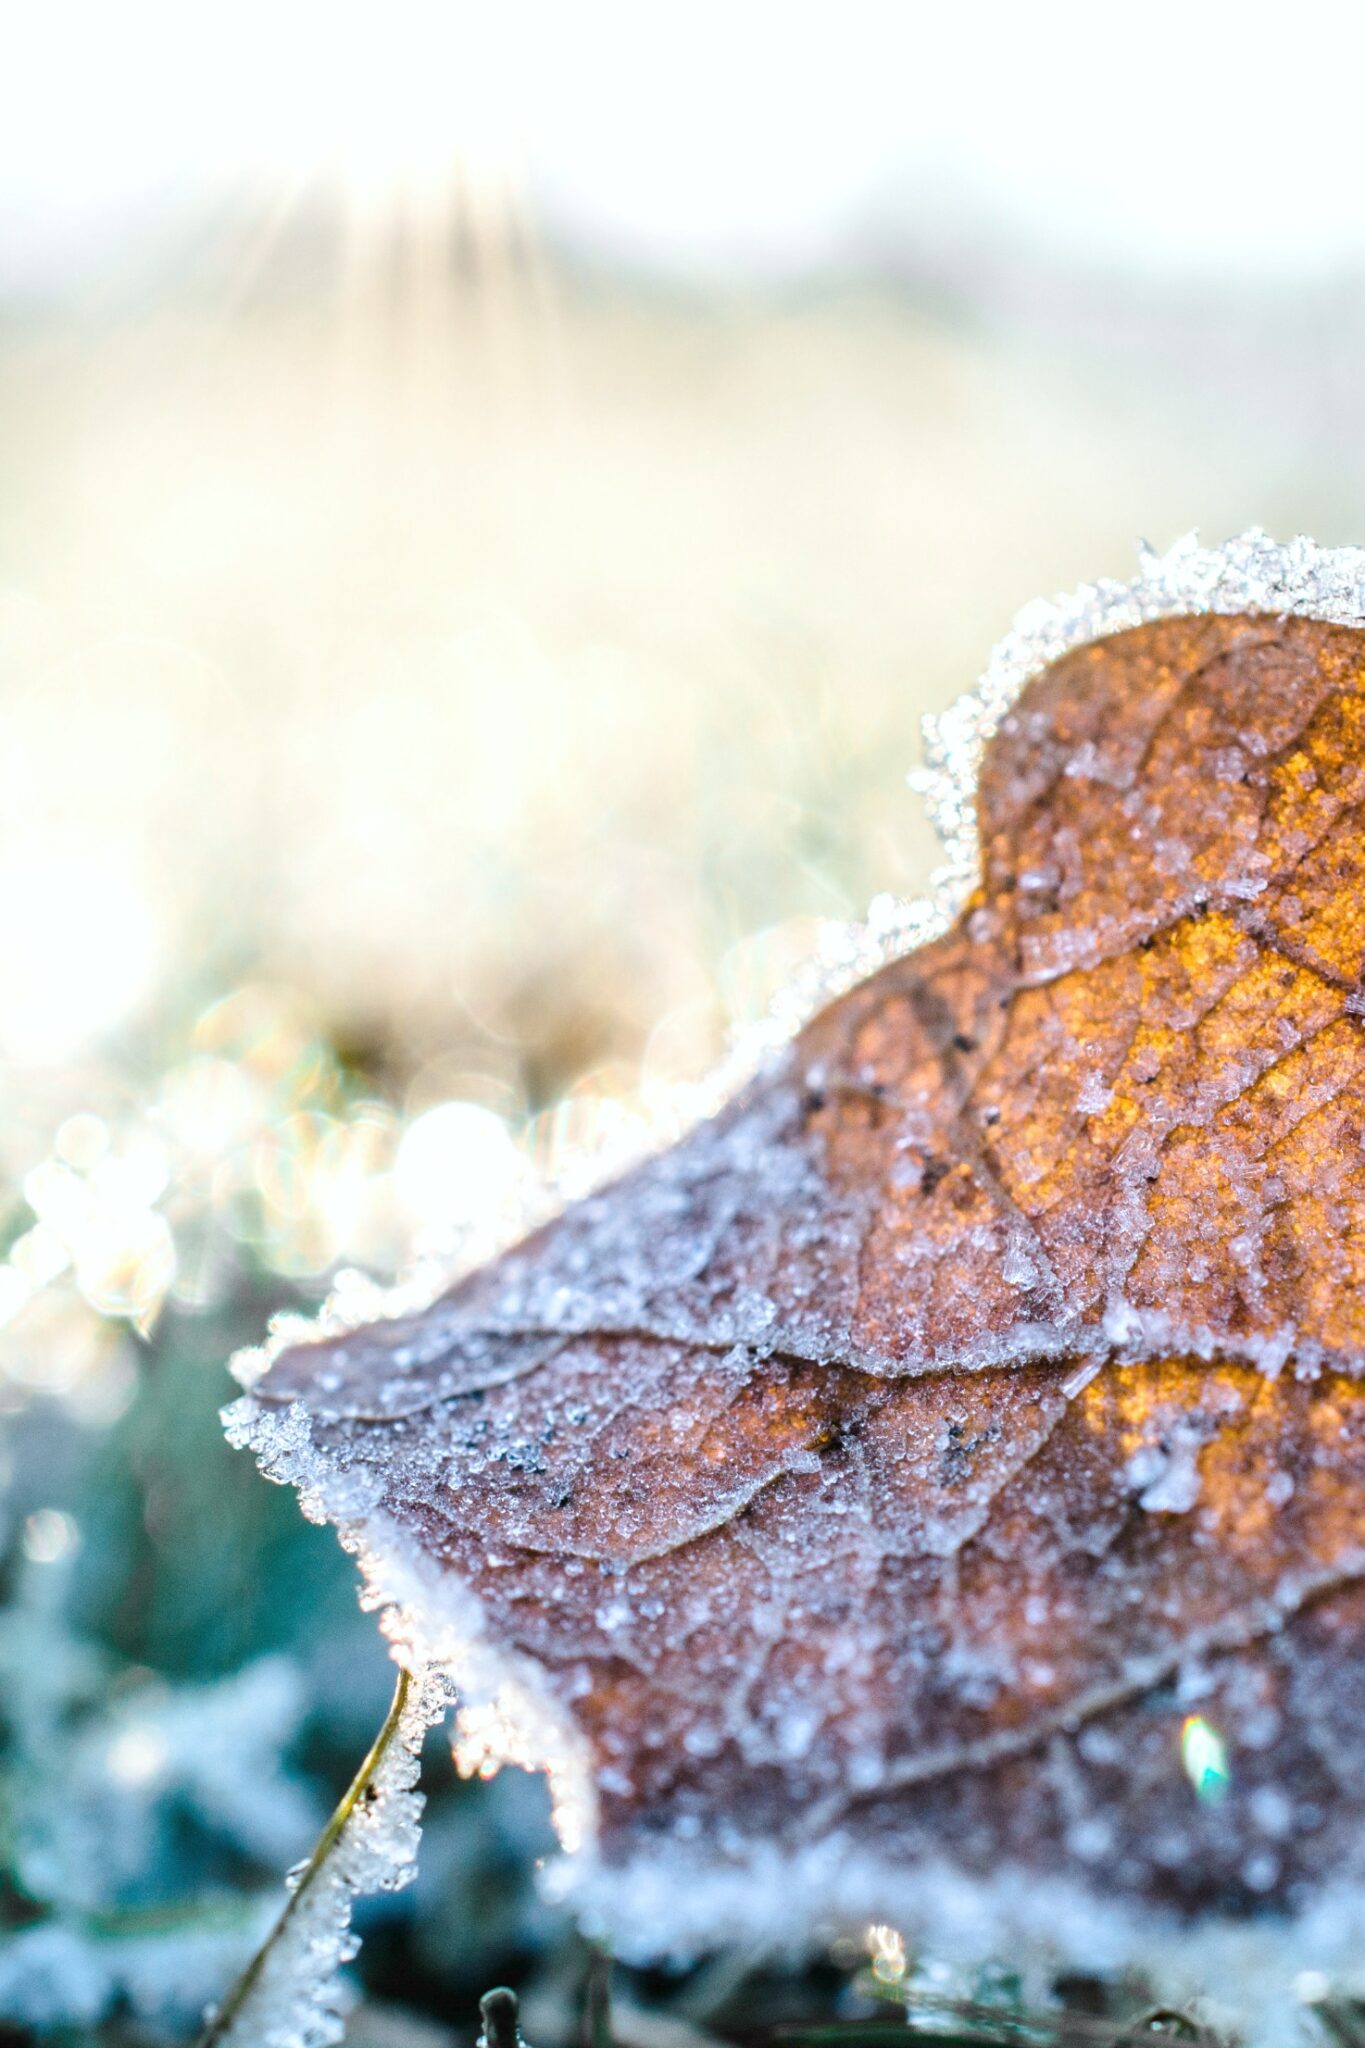 How To Prepare Your Garden for the Winter